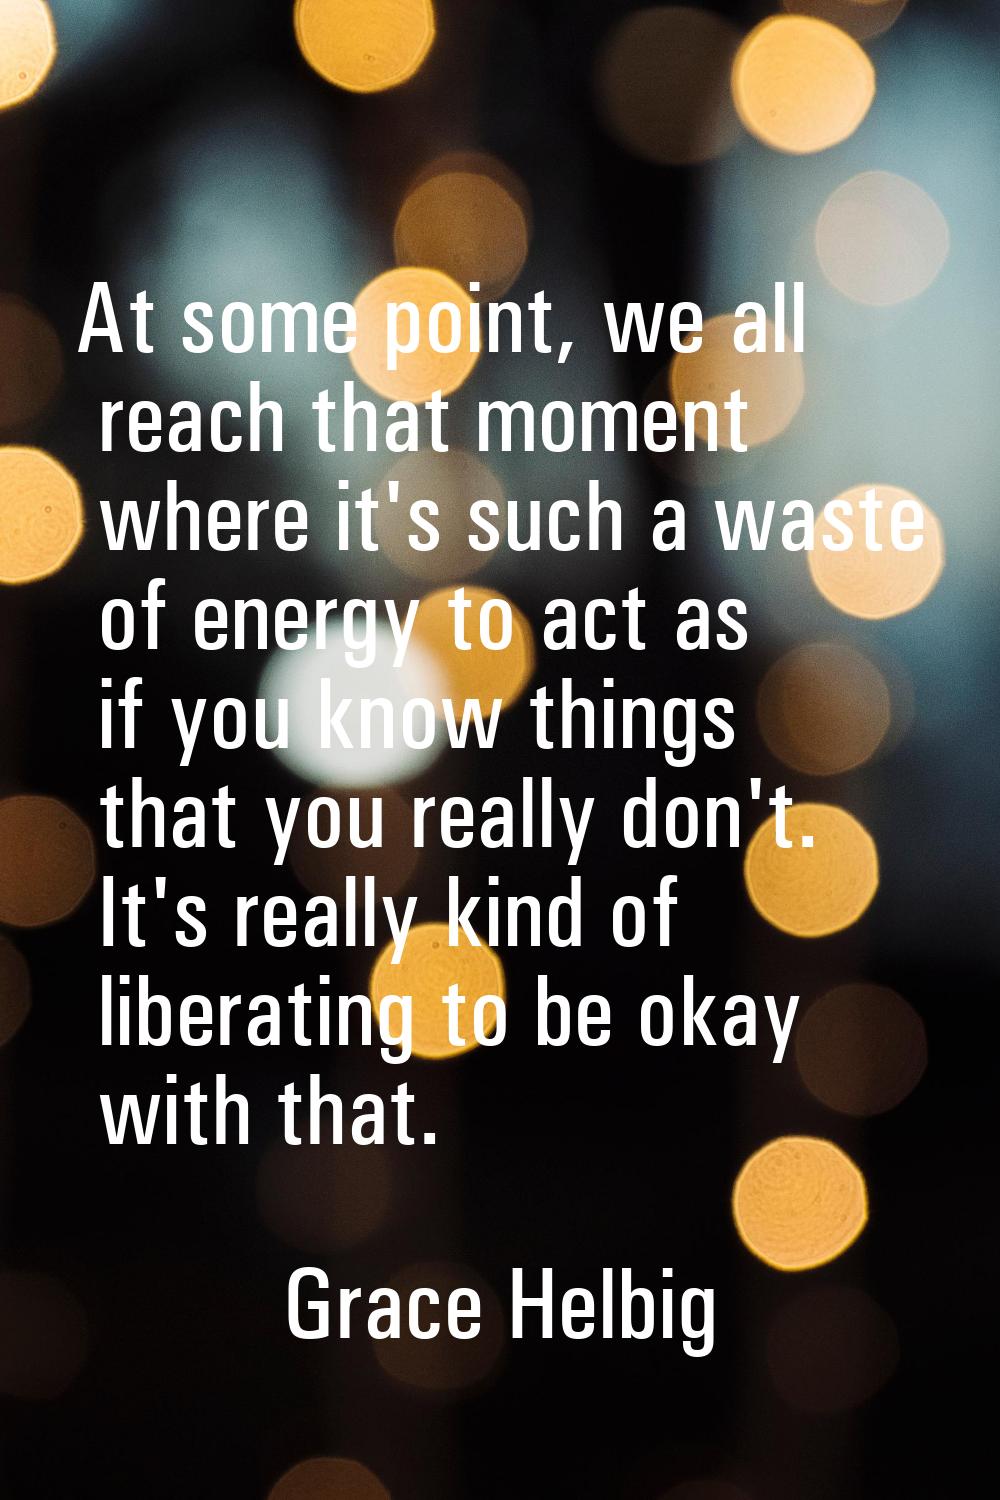 At some point, we all reach that moment where it's such a waste of energy to act as if you know thi